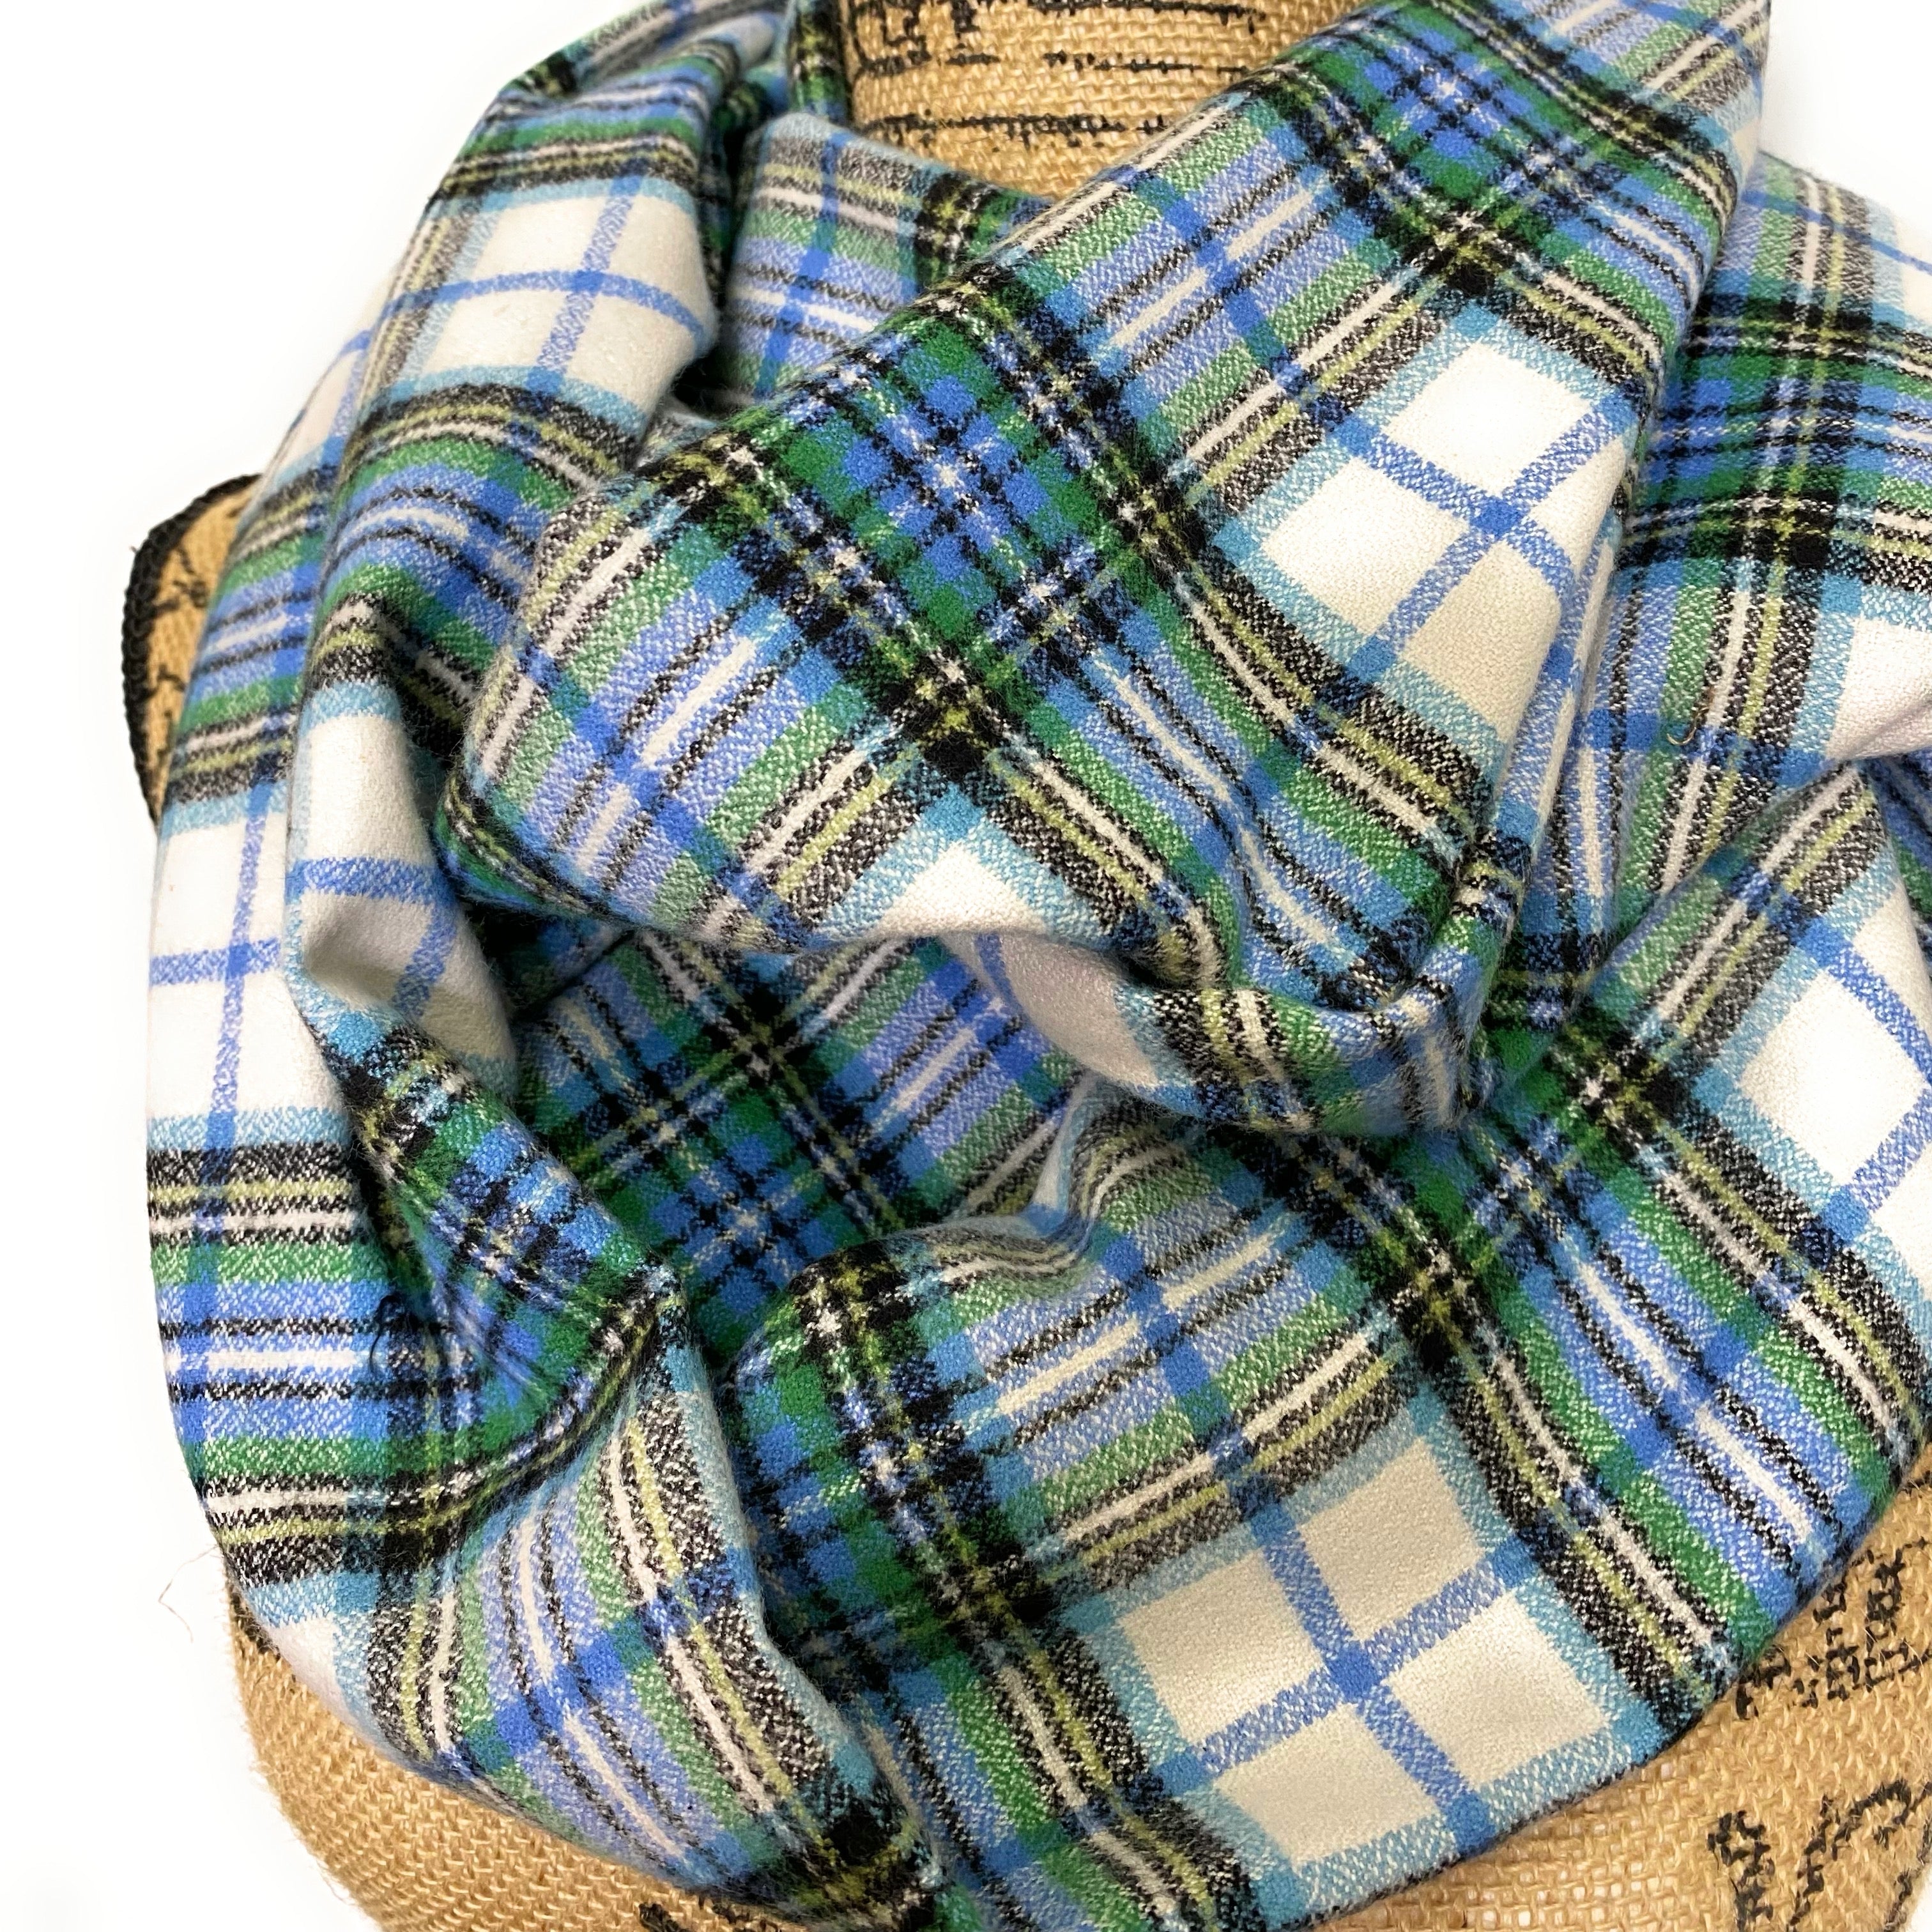 100% Organic Cotton Shades of Blue and Green on White Plaid Infinity and Blanket Scarves